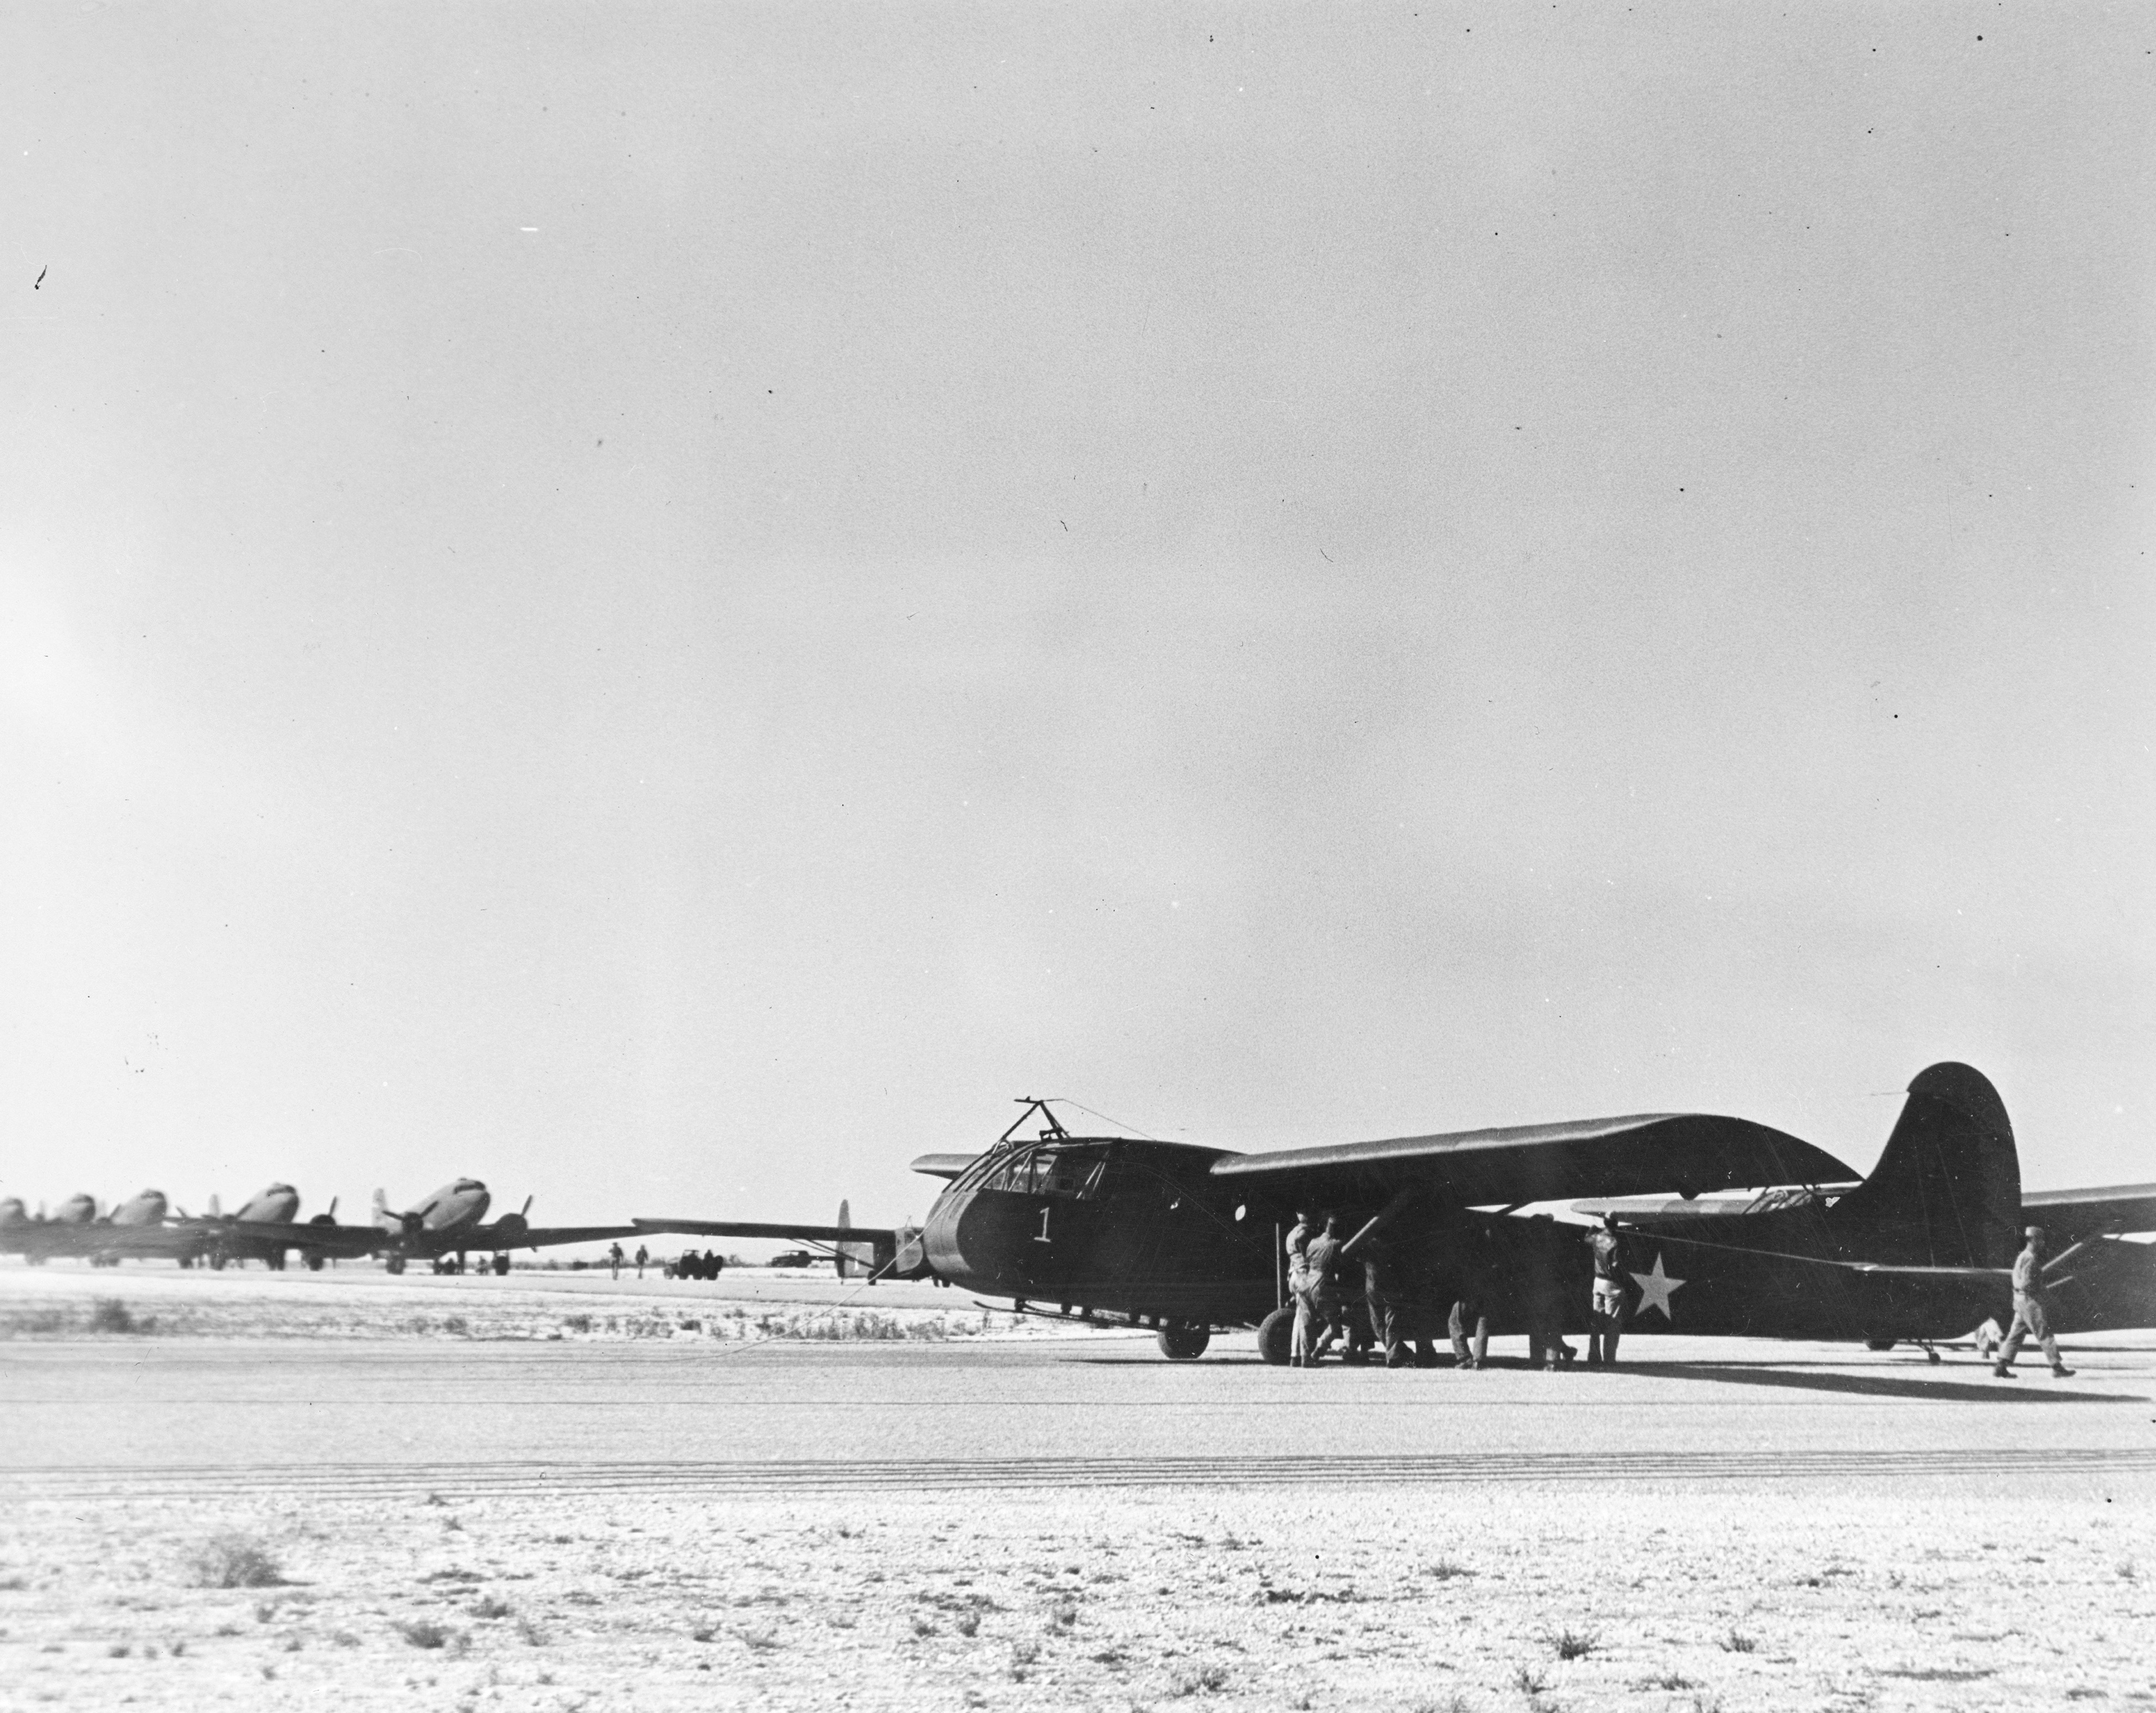 Waco CG-4A glider and C-47 Skytrains on the Big Springs Auxiliary Air Field, Big Springs, Texas, United States, 1942.